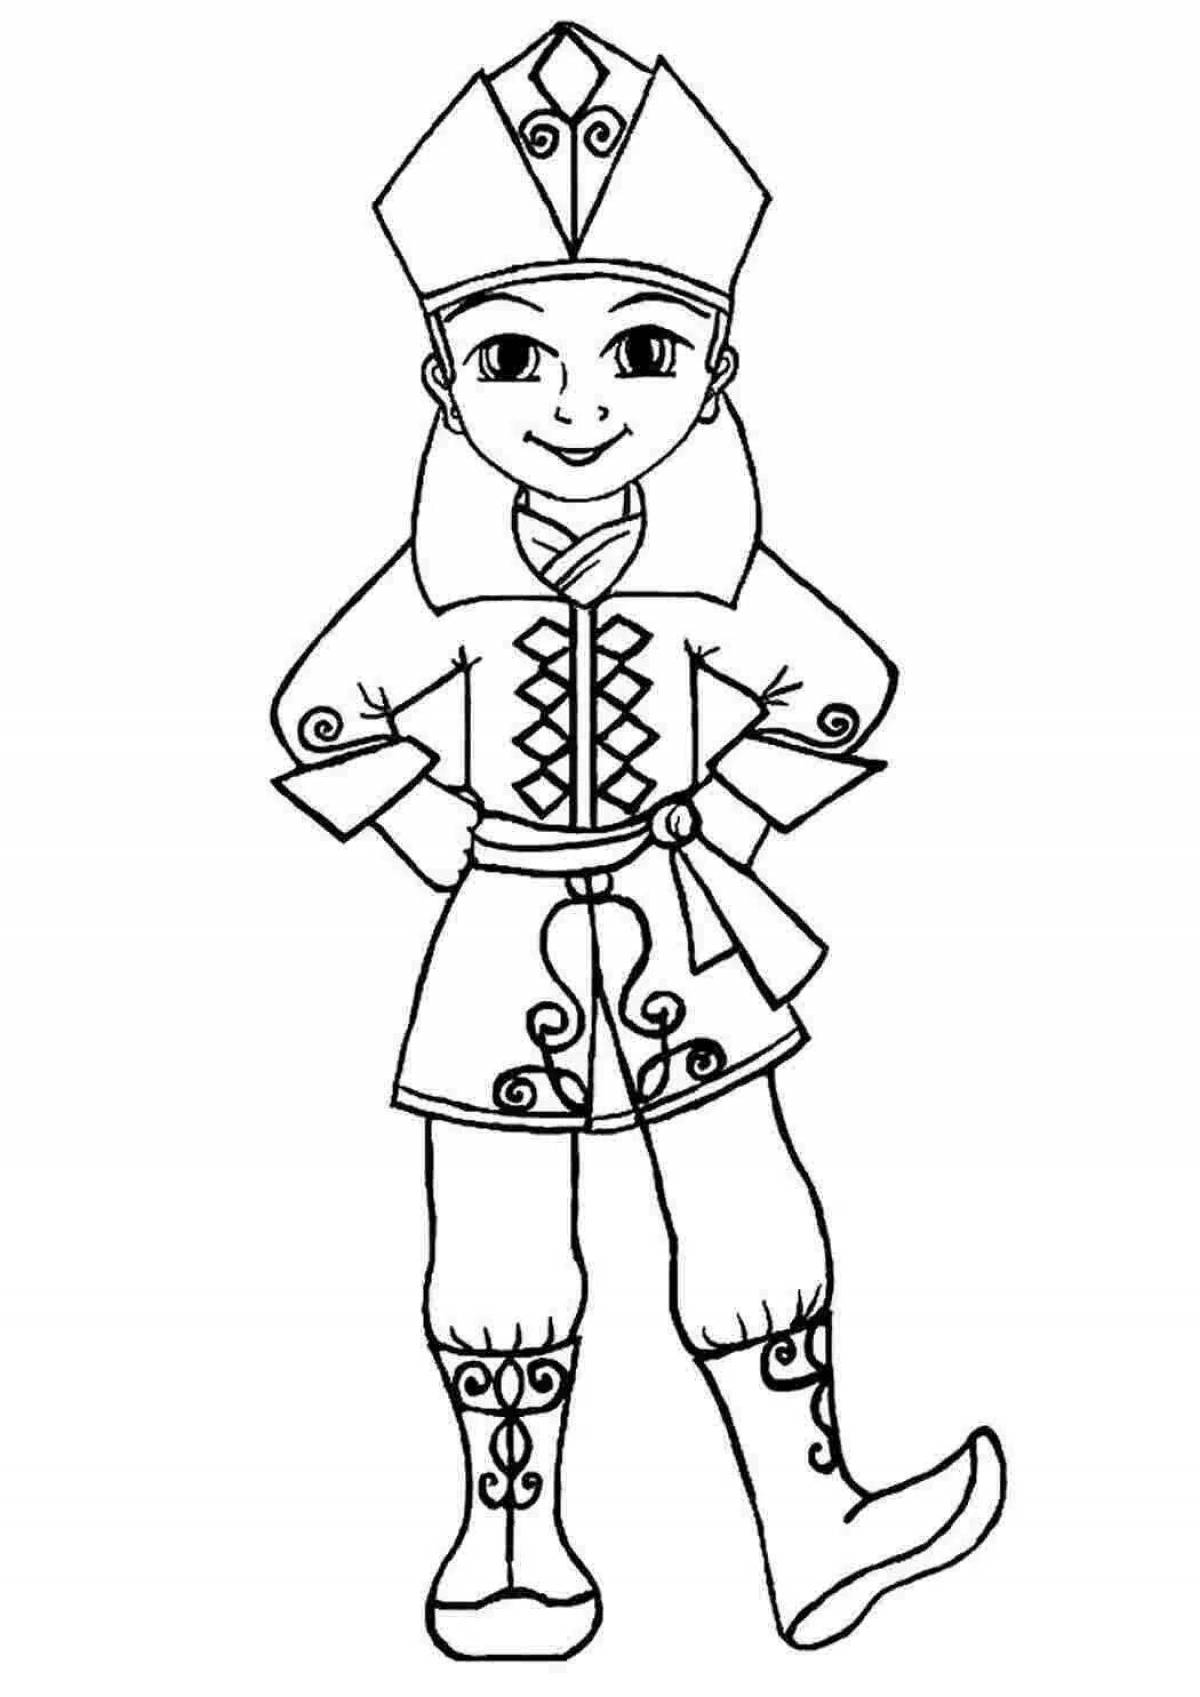 Detailed Russian national costume for children